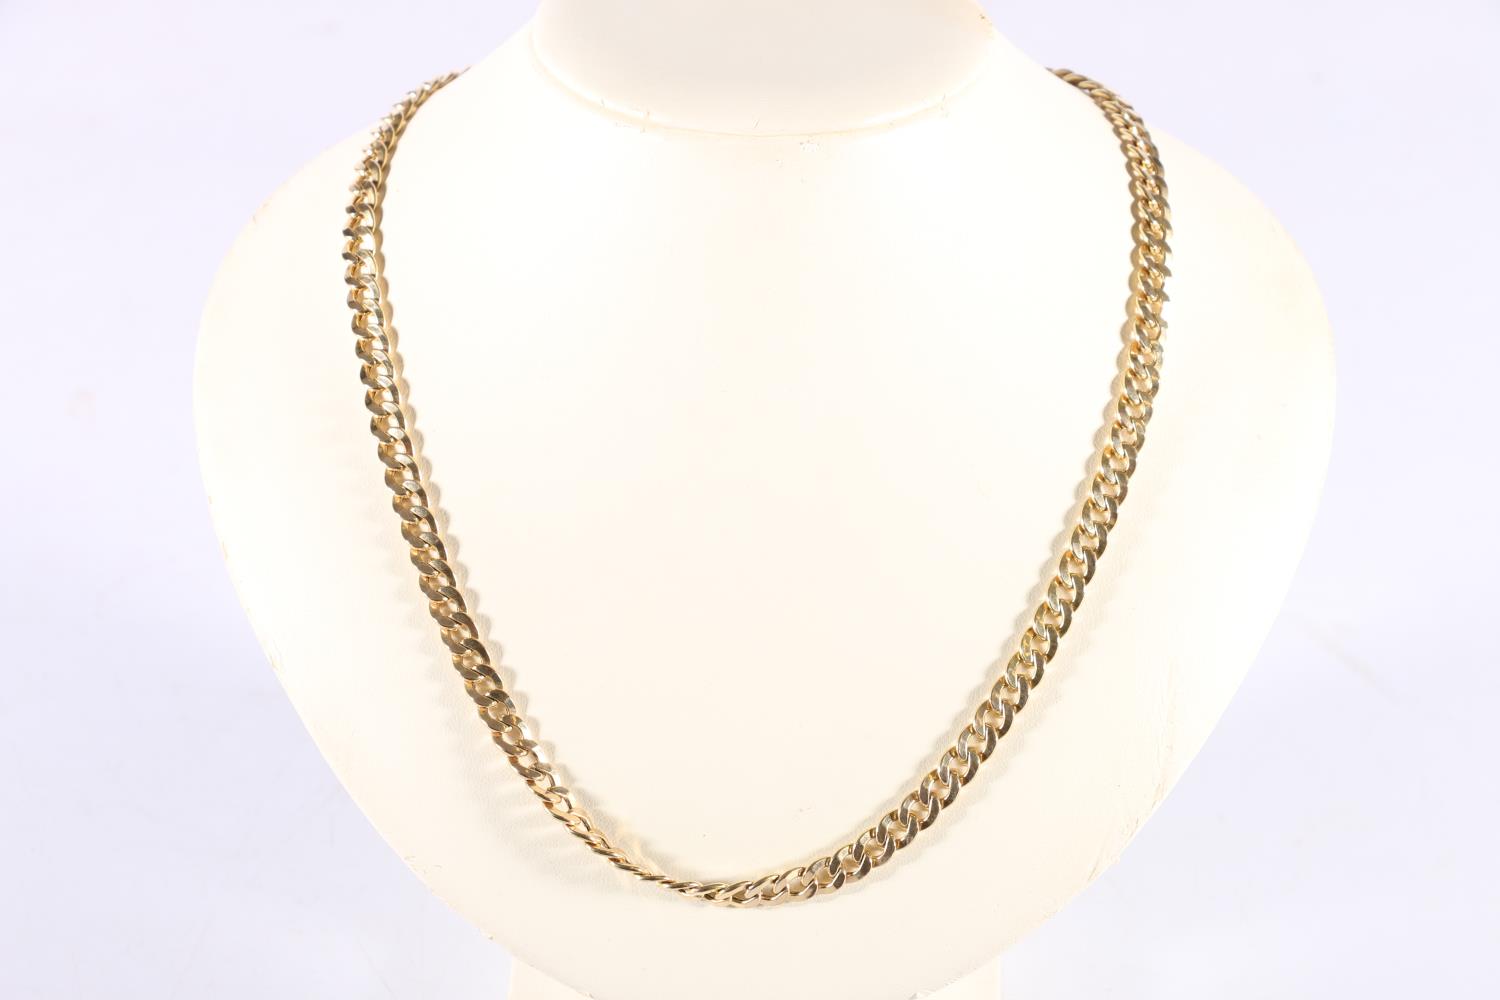 9ct yellow gold flattened curb link neck chain 12.8g